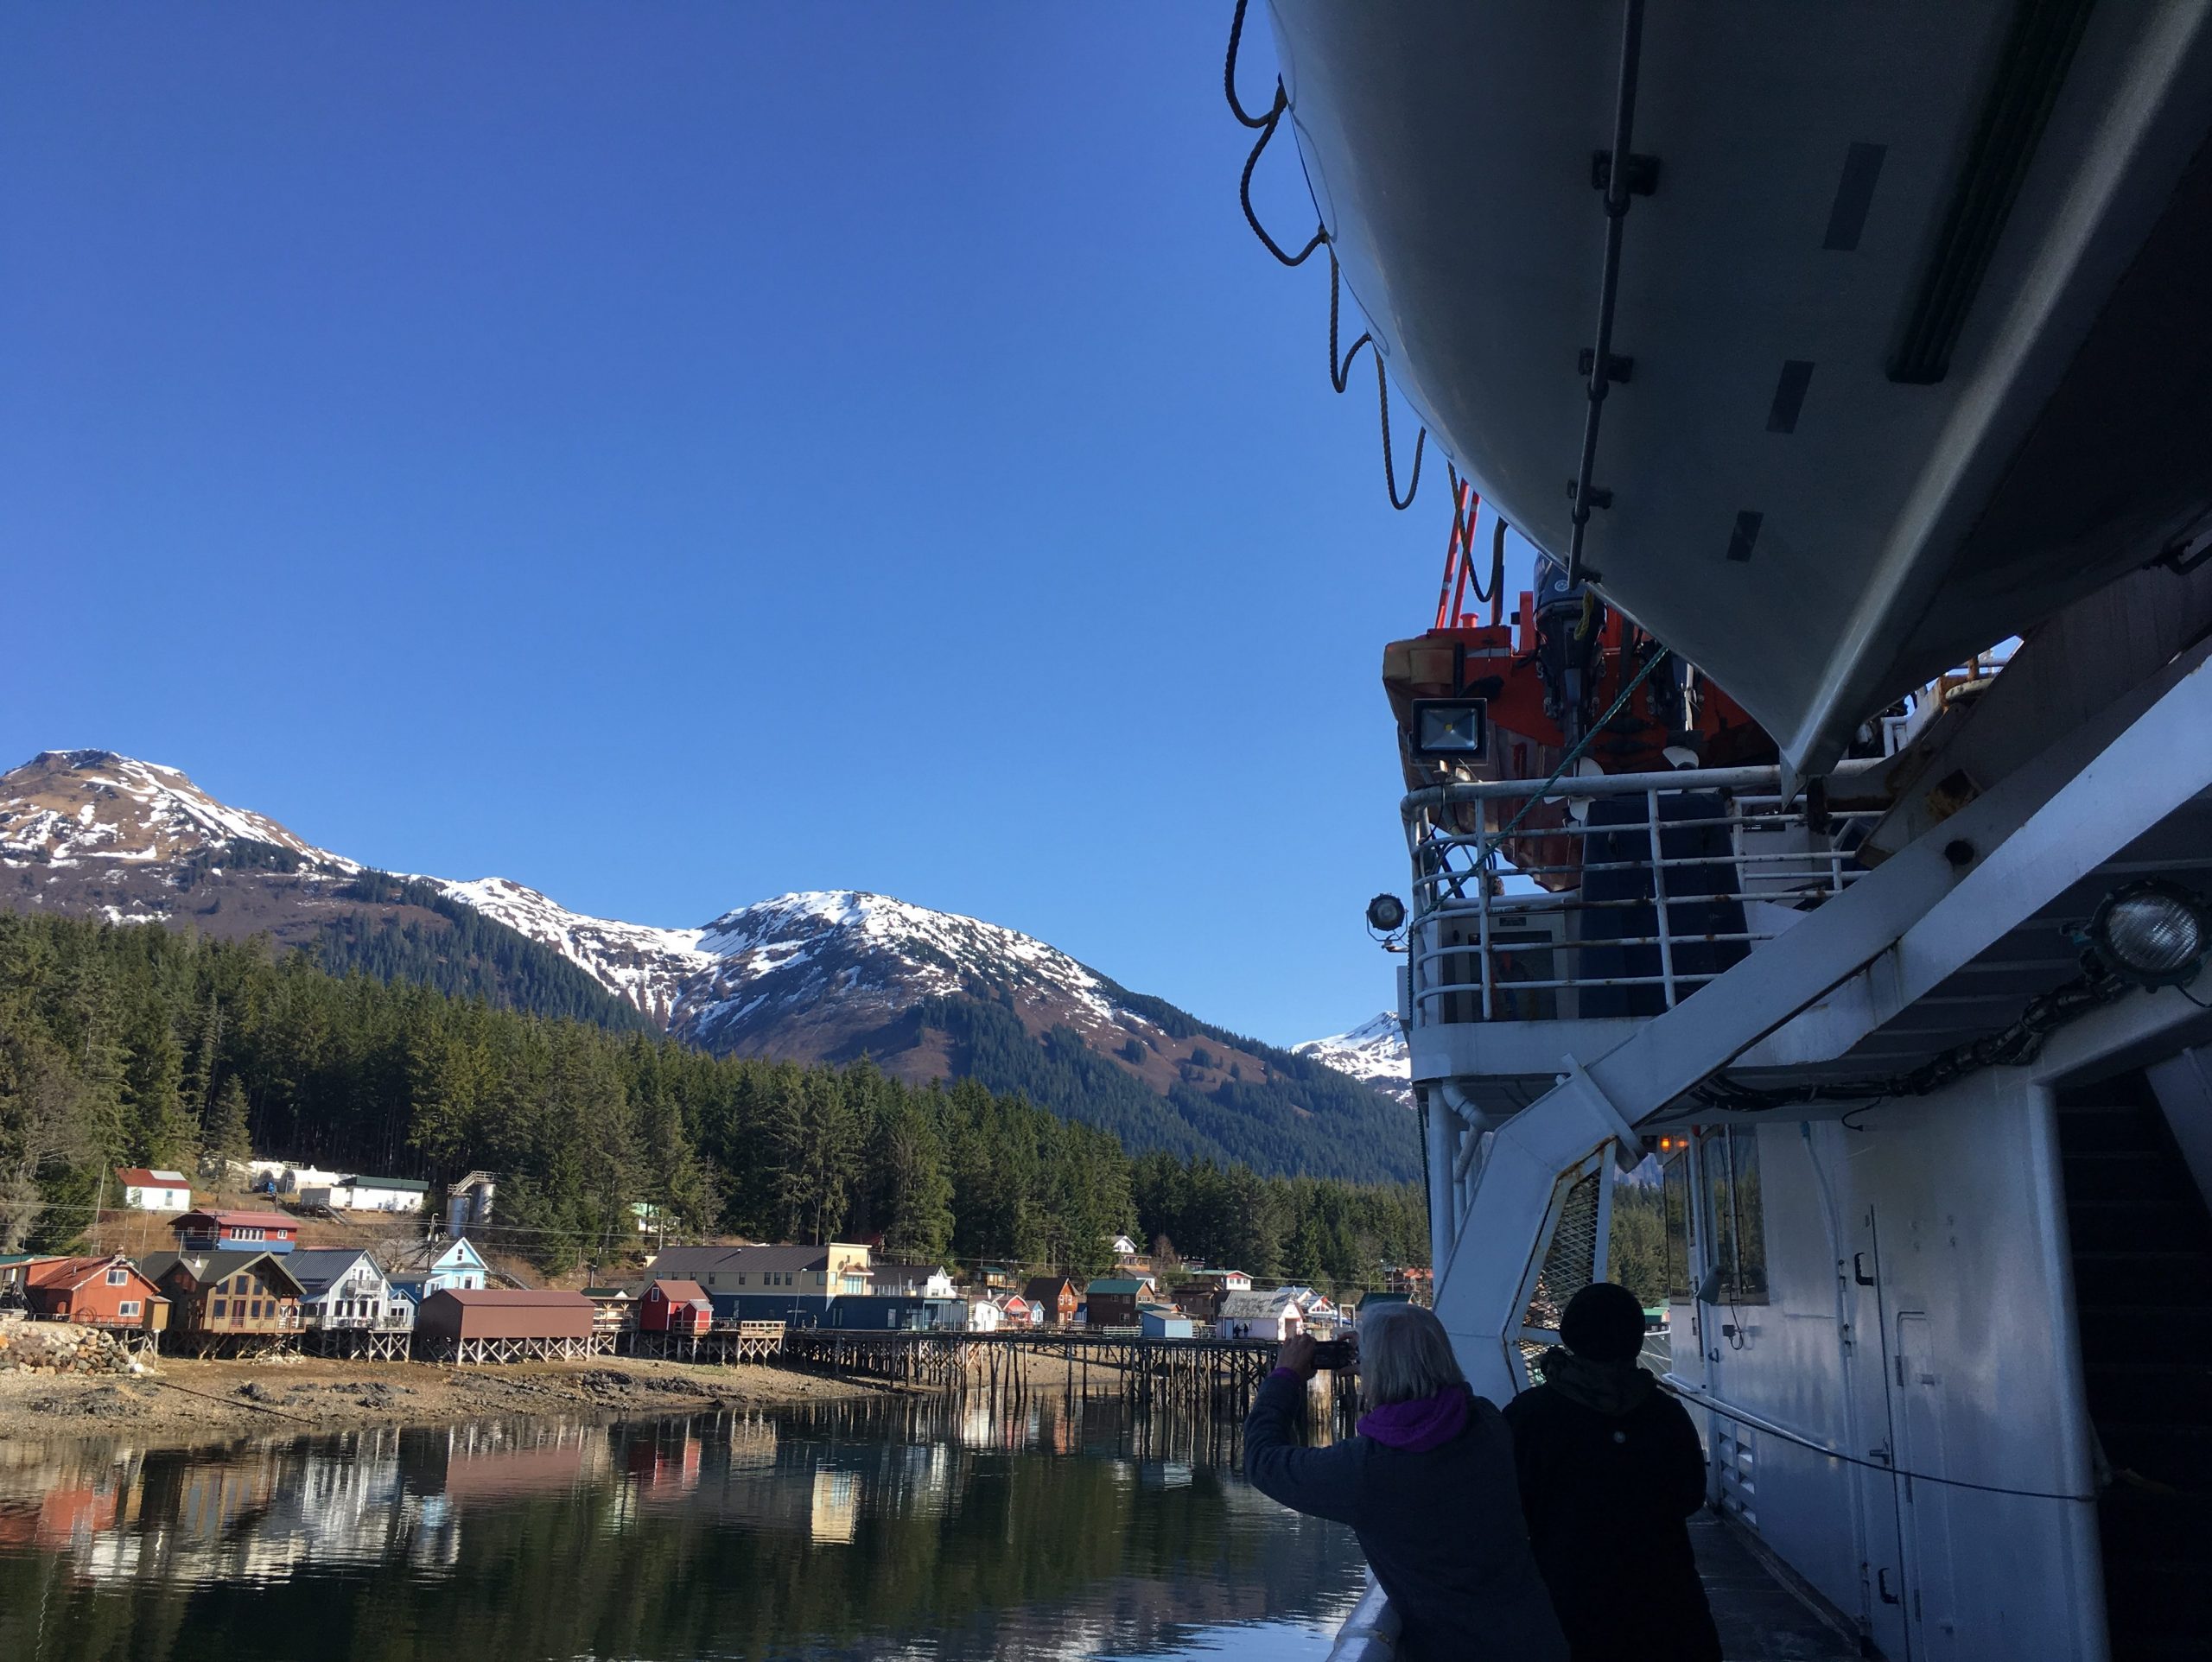 A ferry approaches a town next to spruce covered mountains